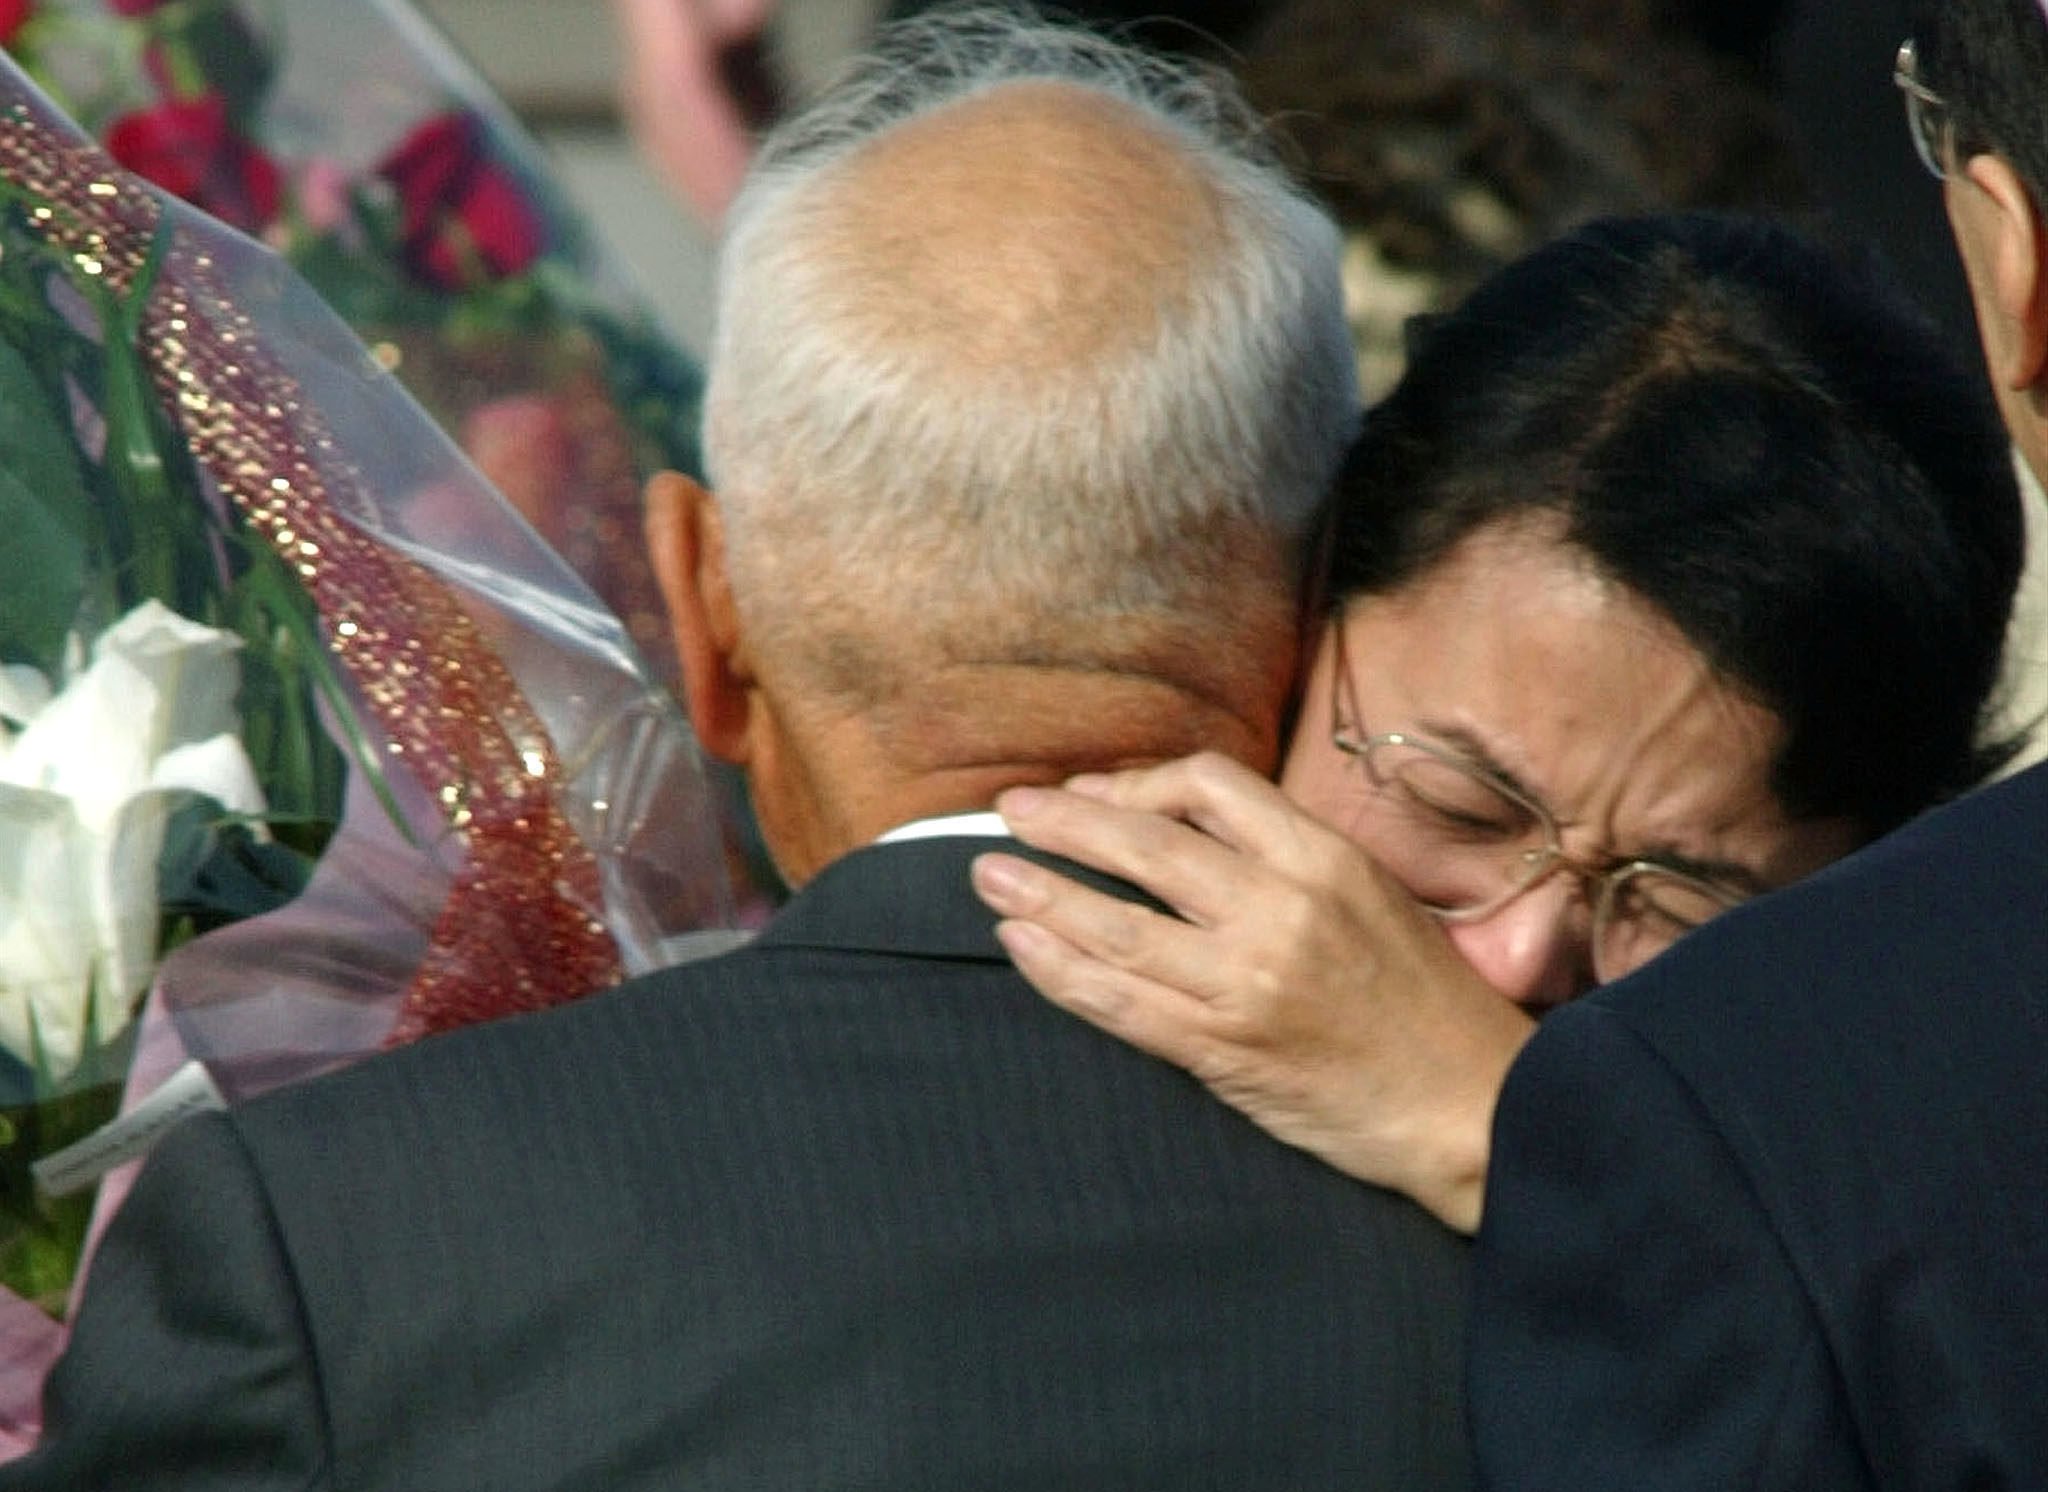 Fukie Hamamoto, abducted by North Korea 25 years ago, hugs her brother upon her return to Japan in 2002. Photo: Reuters